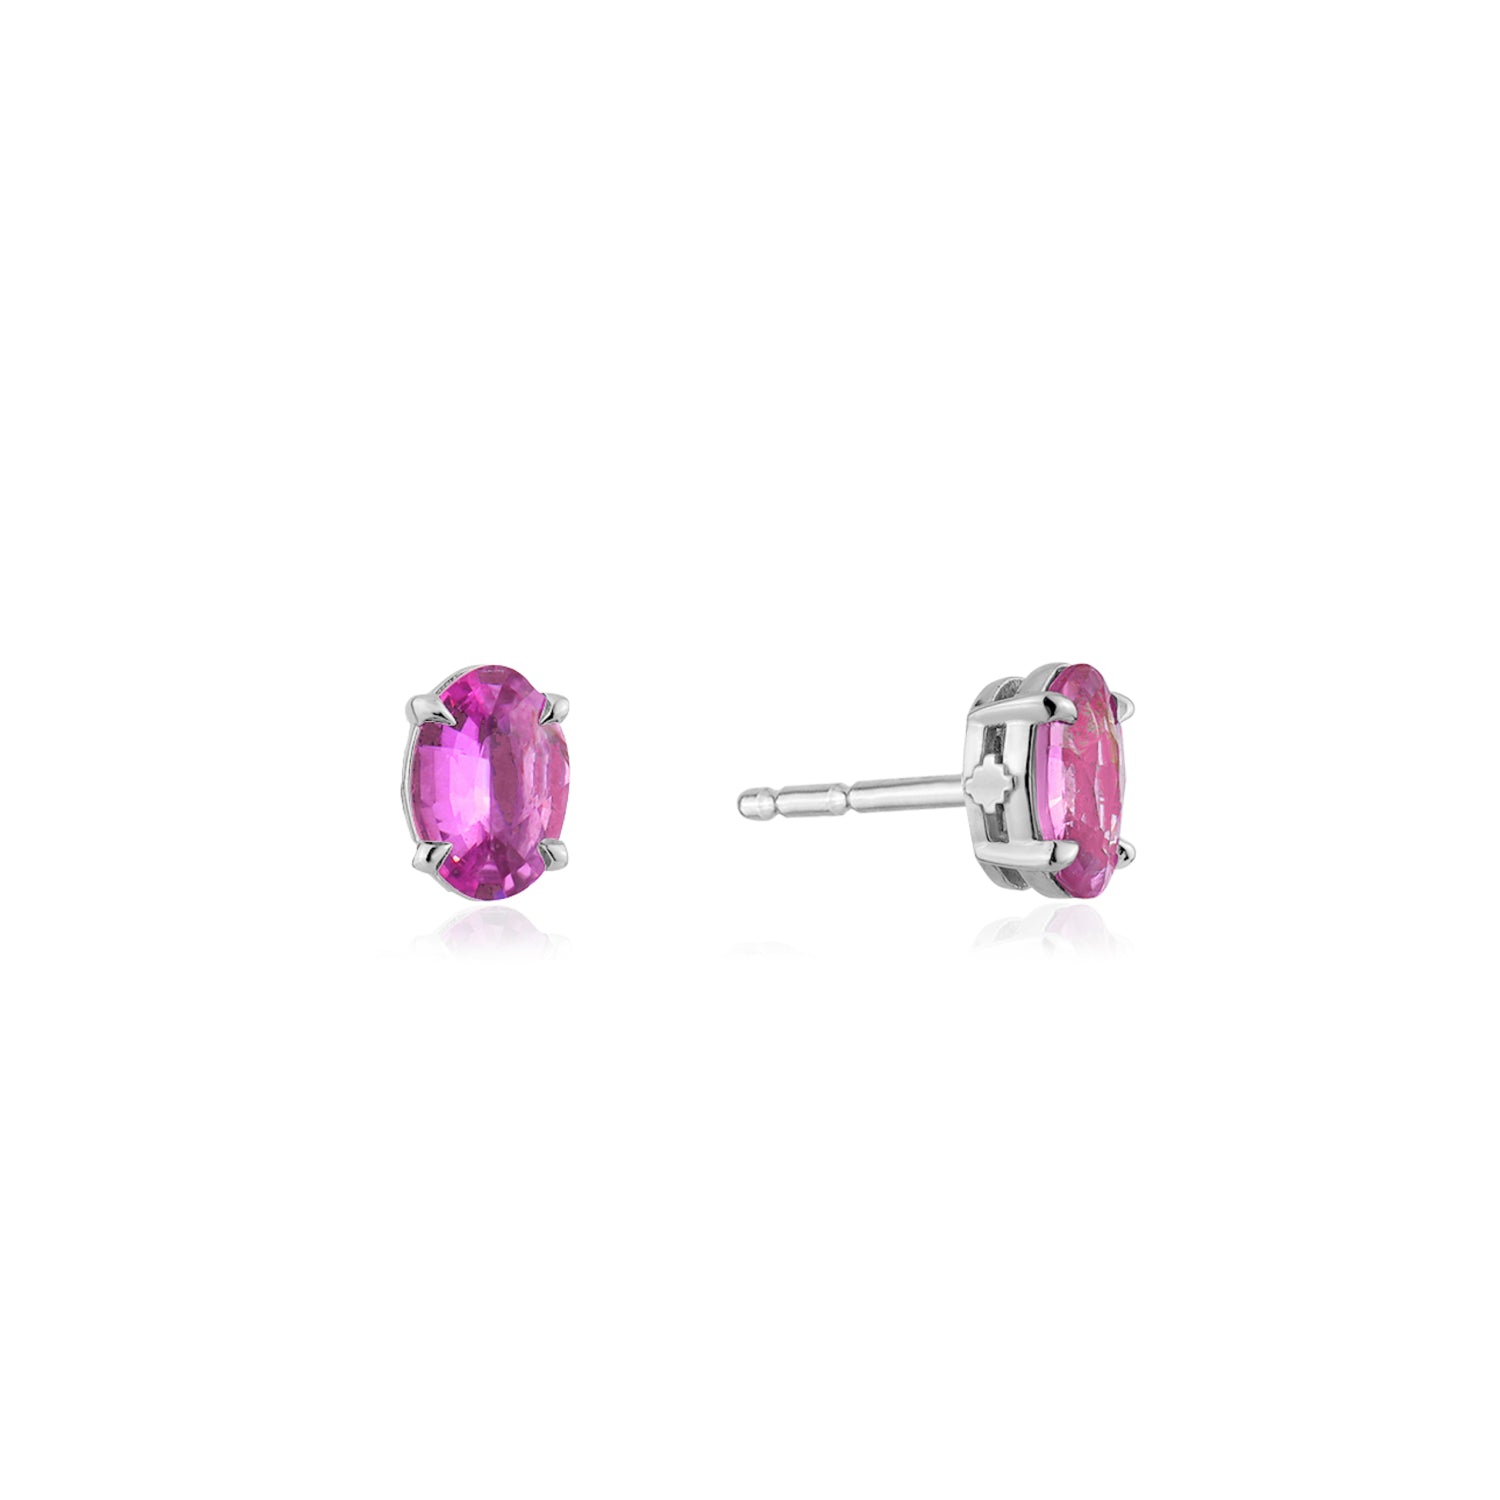 Oval-Shaped Pink Sapphire Stud Earrings in White Gold